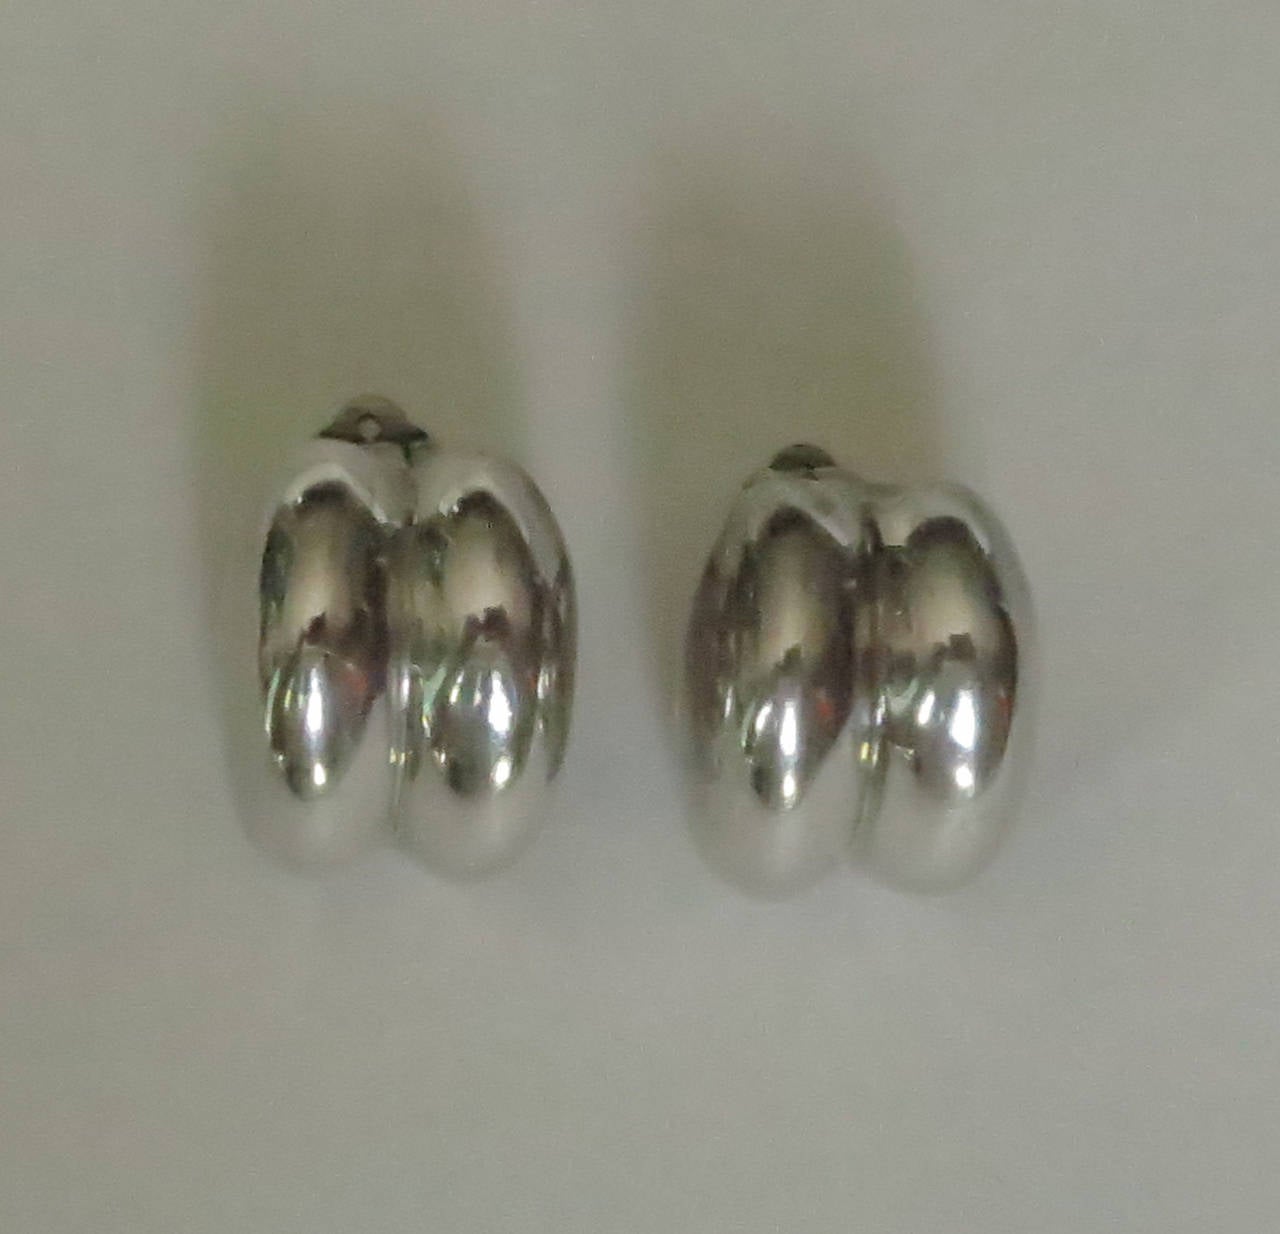 Sleek & modern Patricia Von Musulin sterling silver ear clips...In excellent condition...

Measurements are:
1